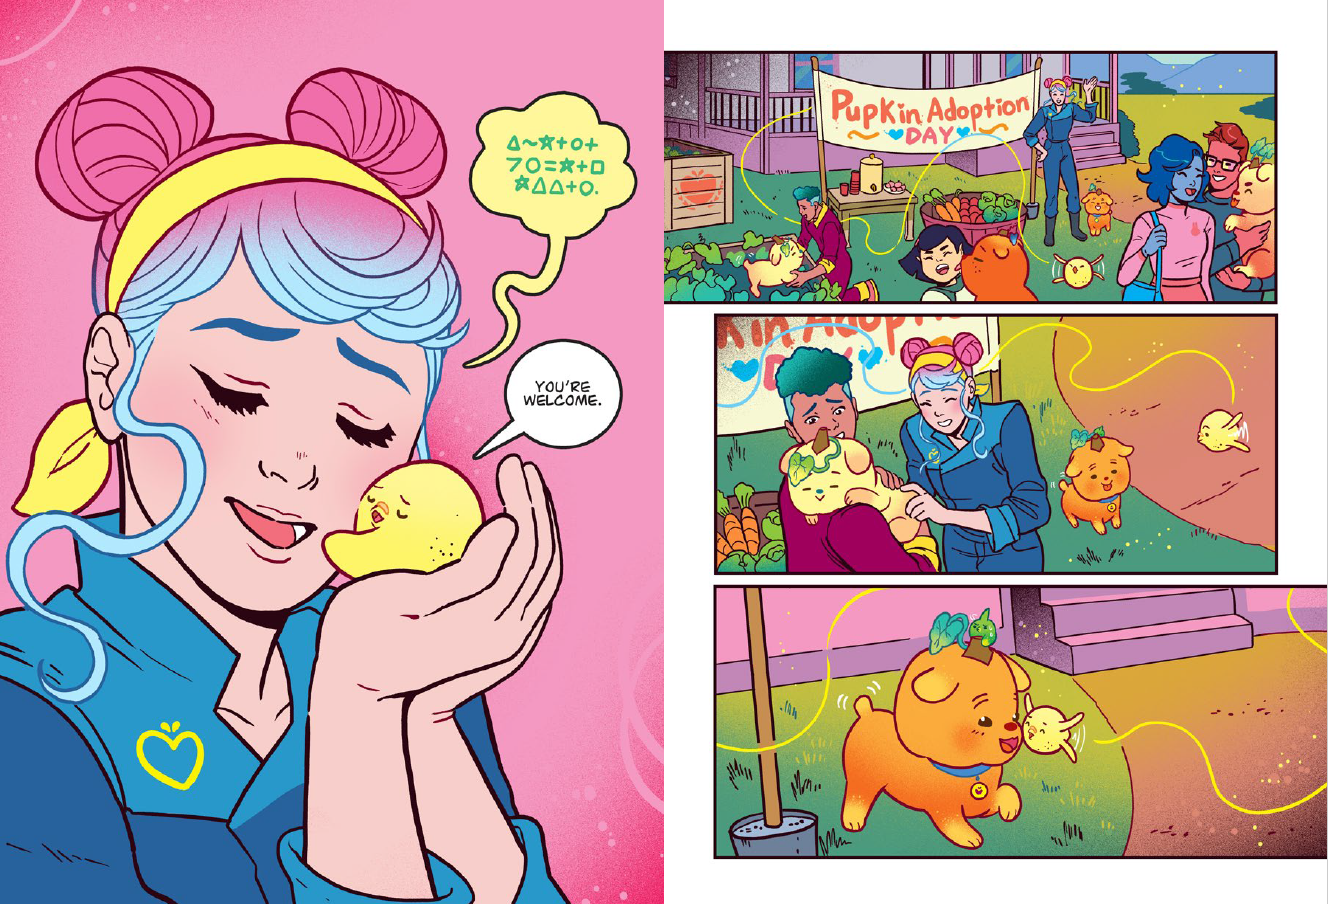 Interior pages of Lemon Bird Can Help featuring a character holding lemon bird on the left and lemon bird running on the right